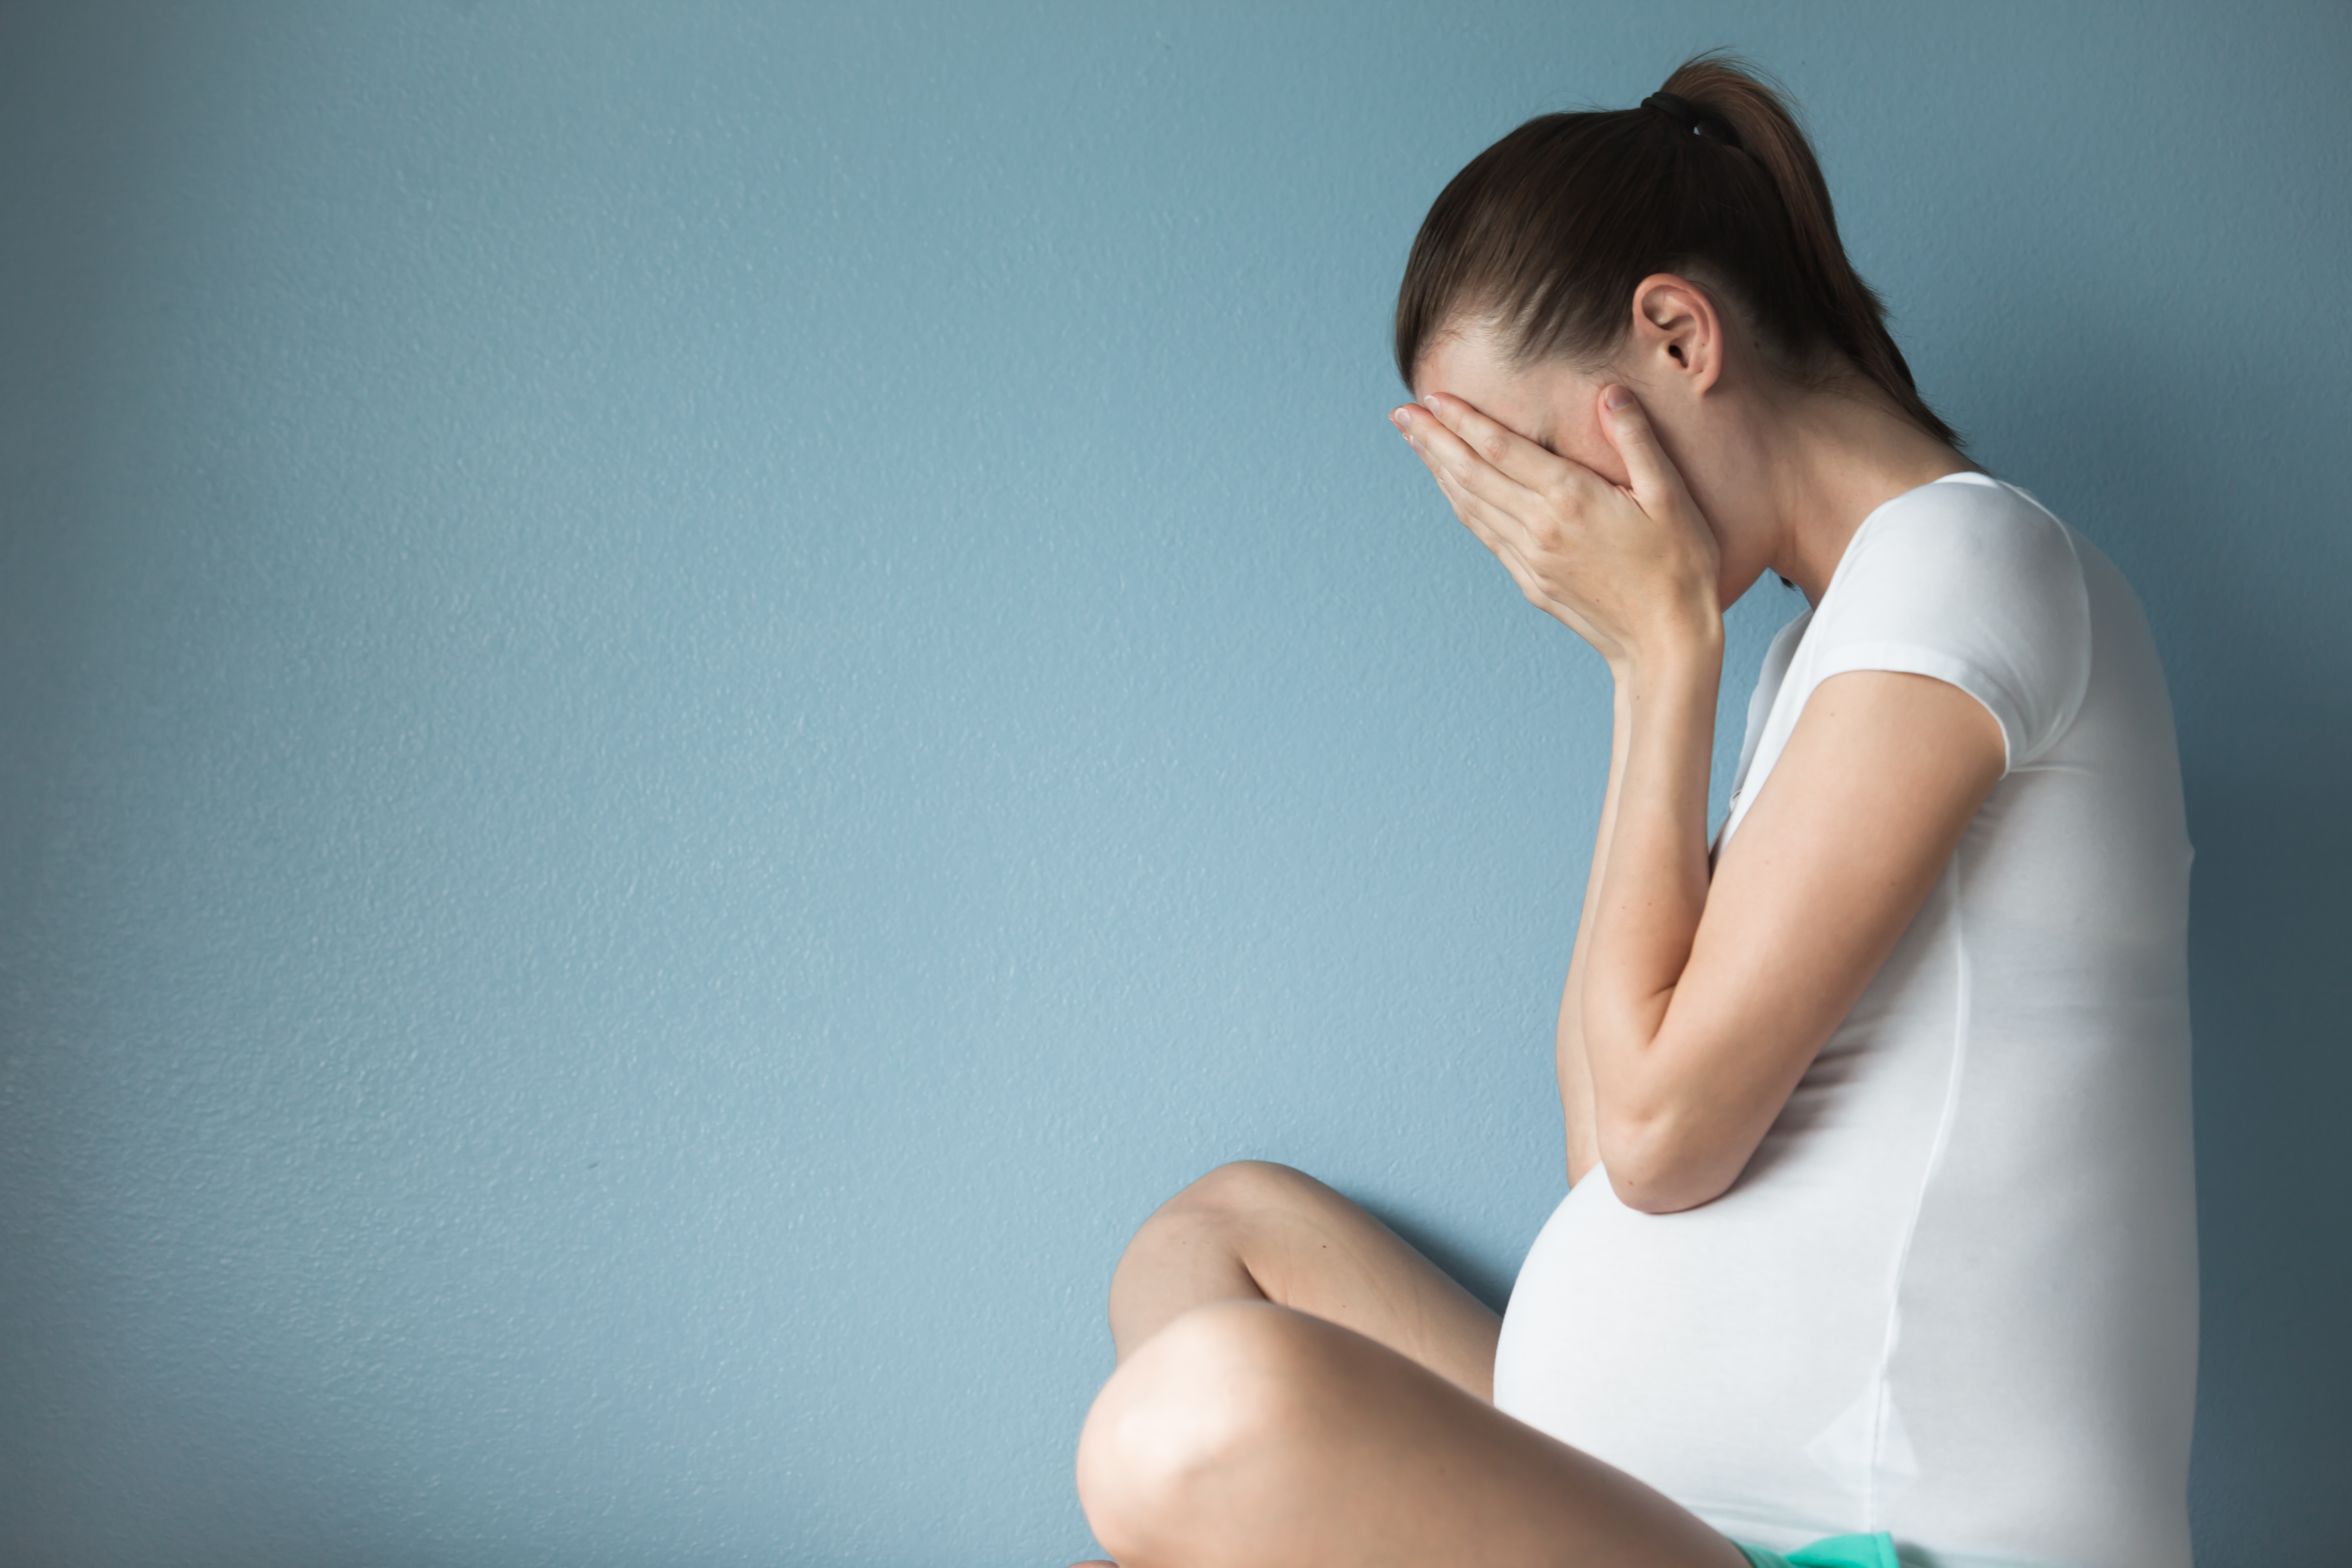 An upset pregnant woman holding her belly | Source: Shutterstock